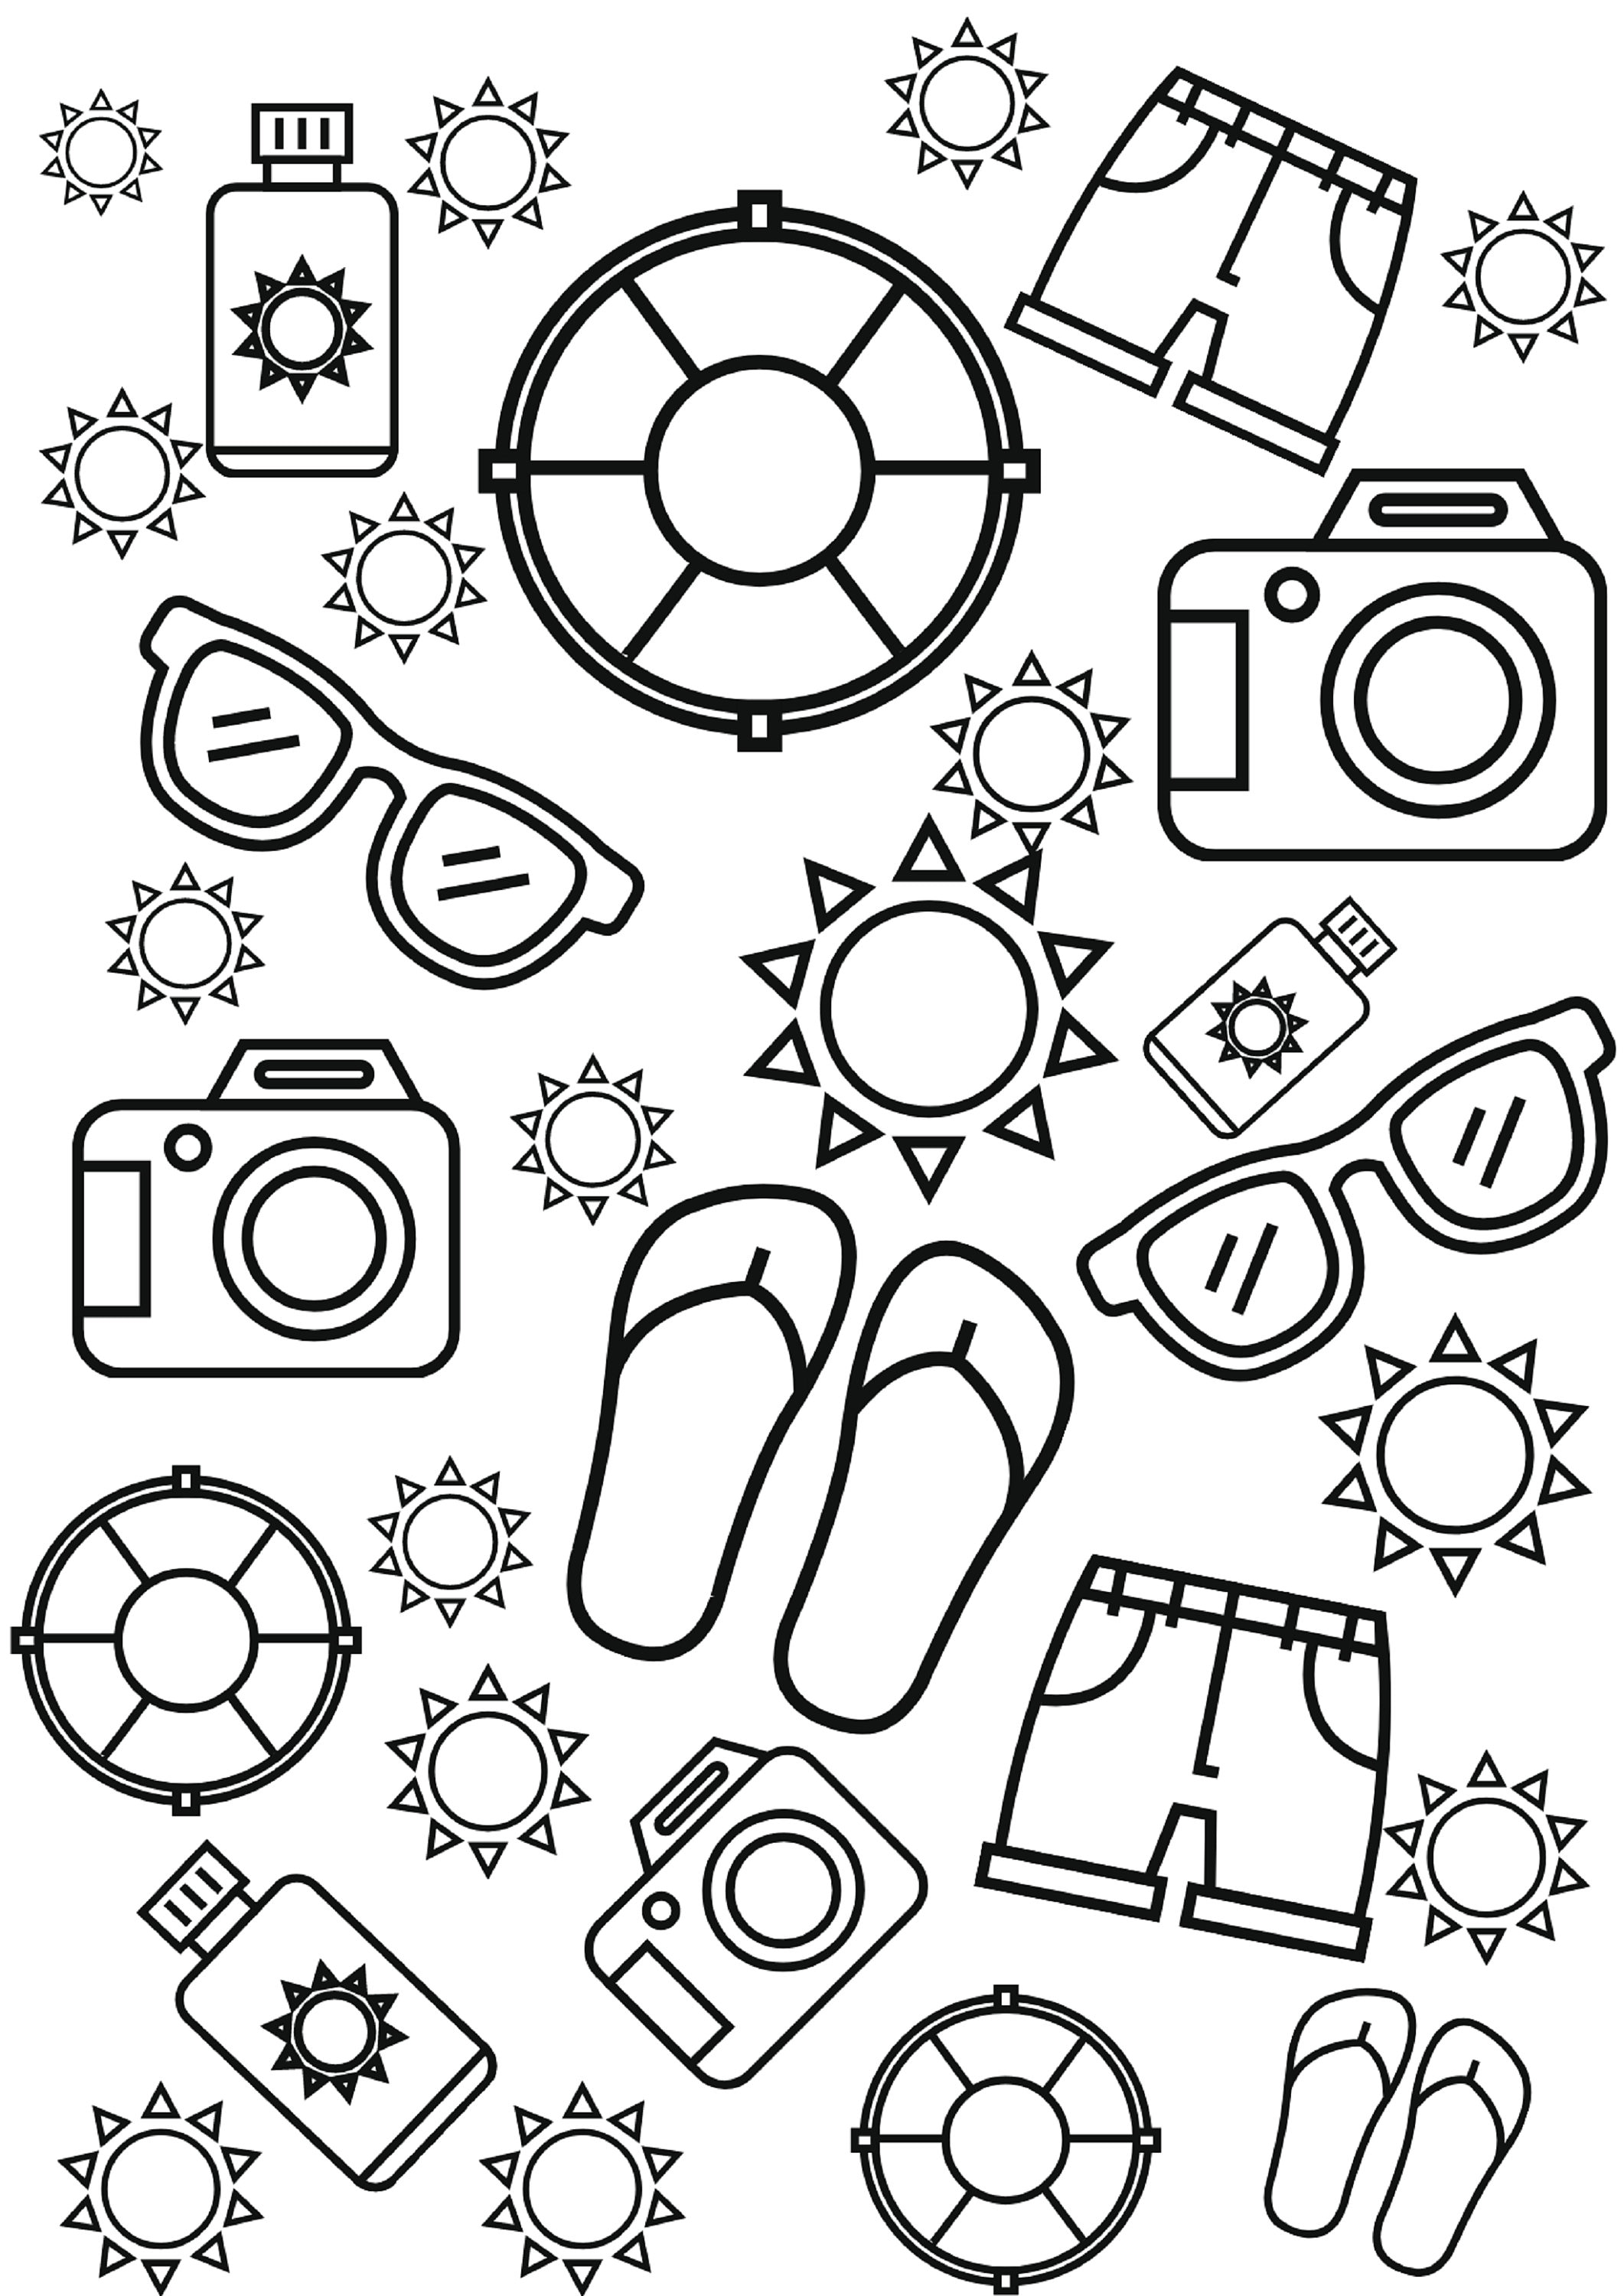 Summer-themed Digital Downloadable Printable Colouring Pages | Etsy